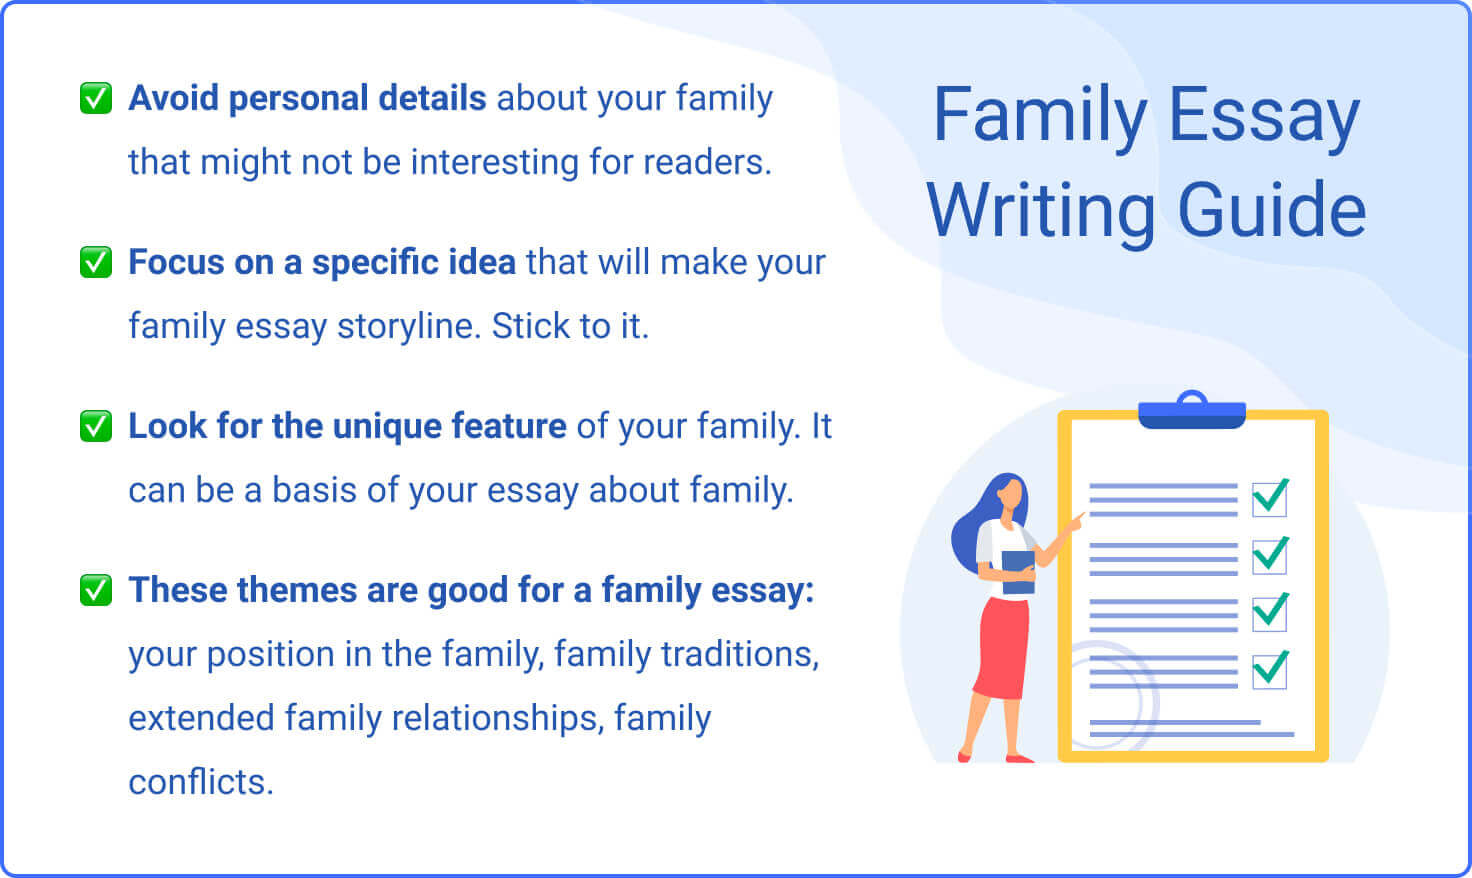 tell us about your family essay